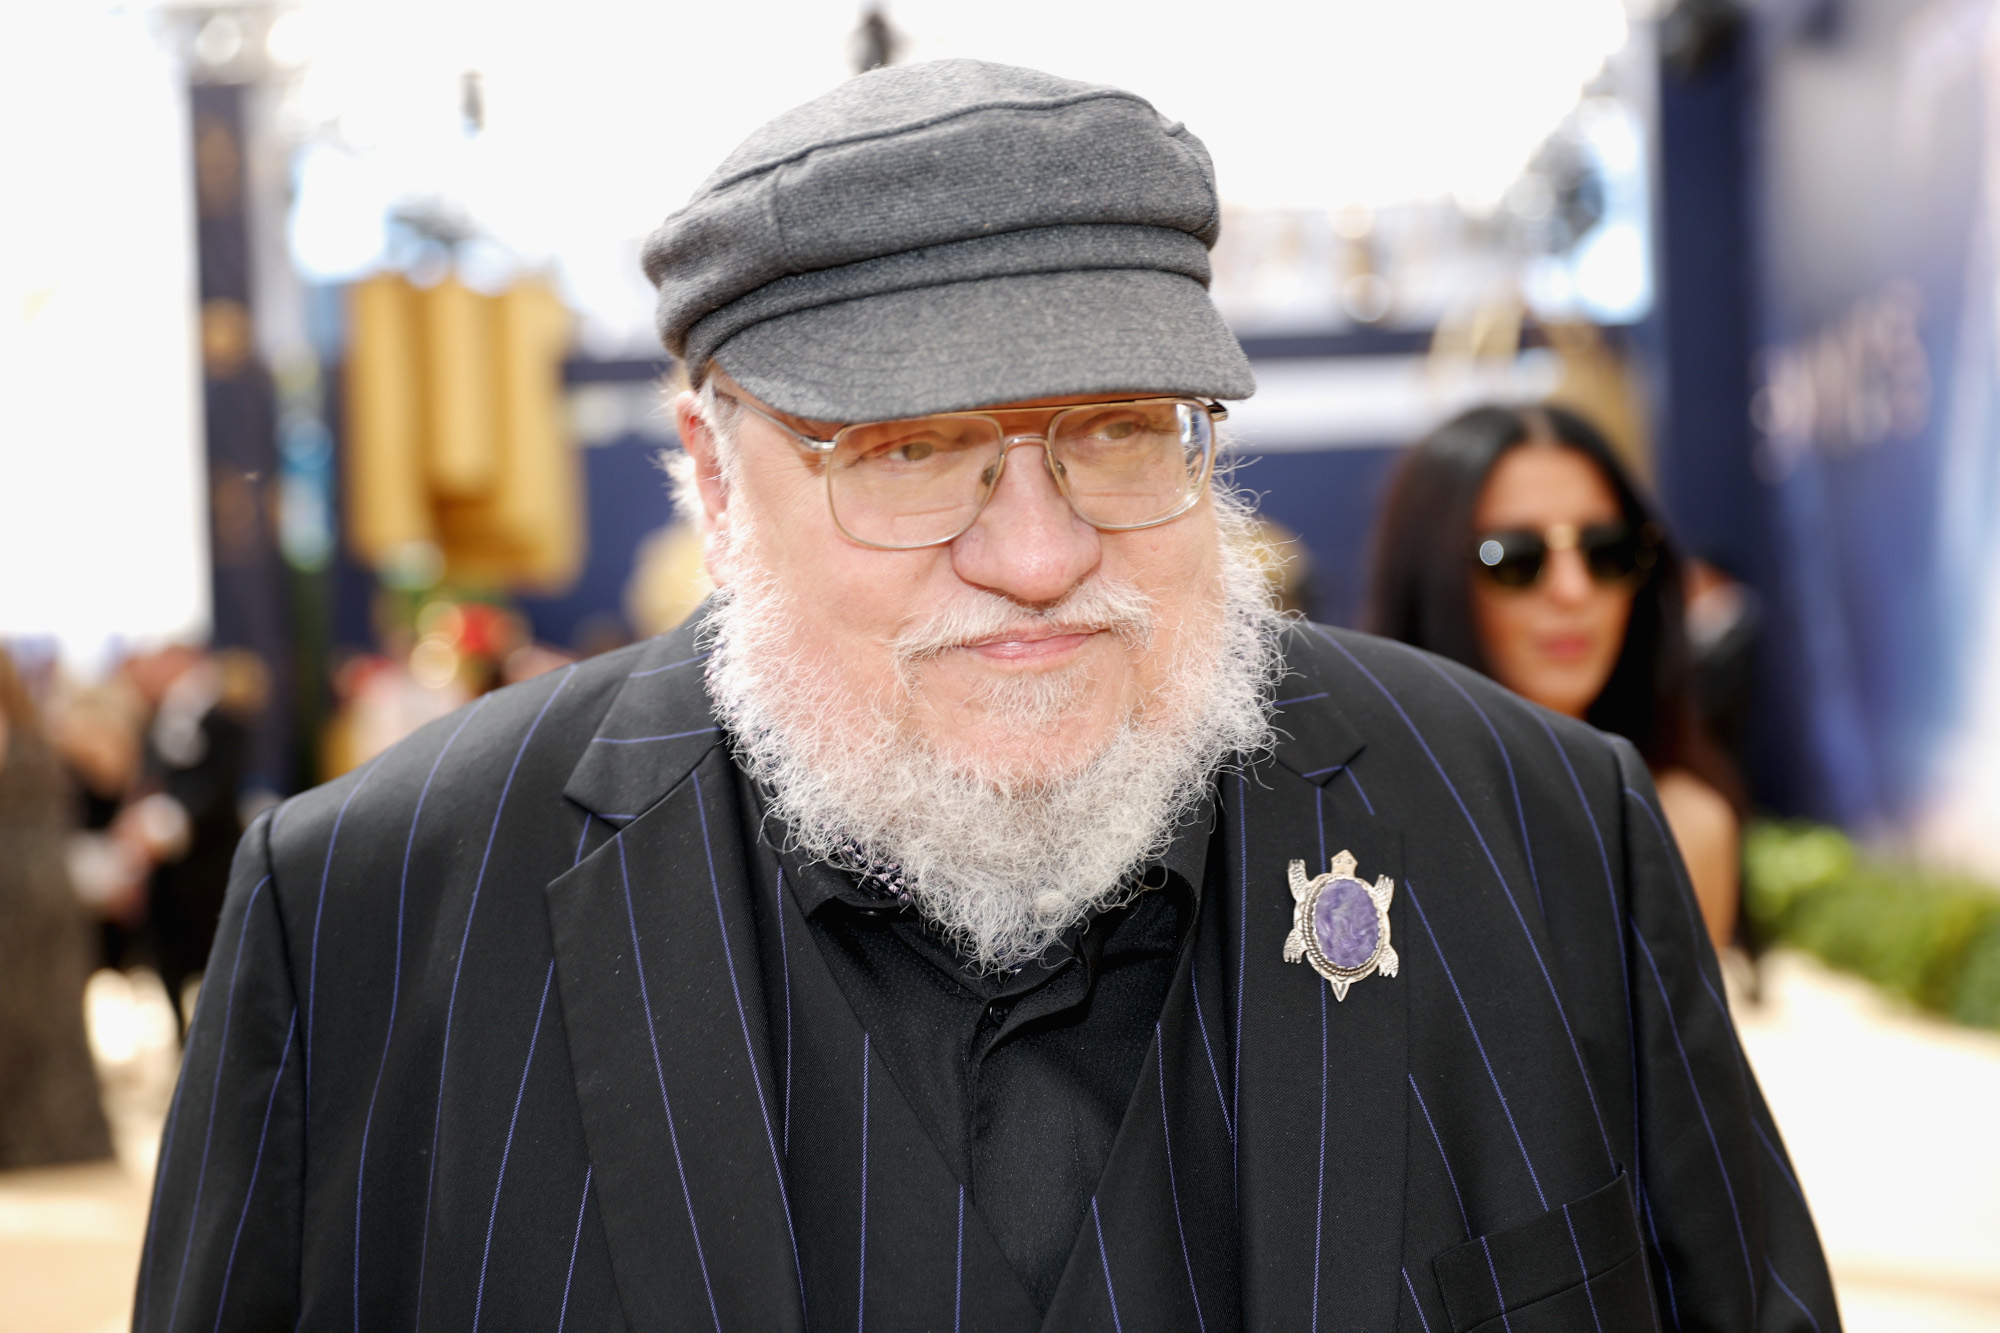 George R.R. Martin, who wanted more seasons of 'Game of Thrones.' He's wearing a black suit, pin, and grey hat.